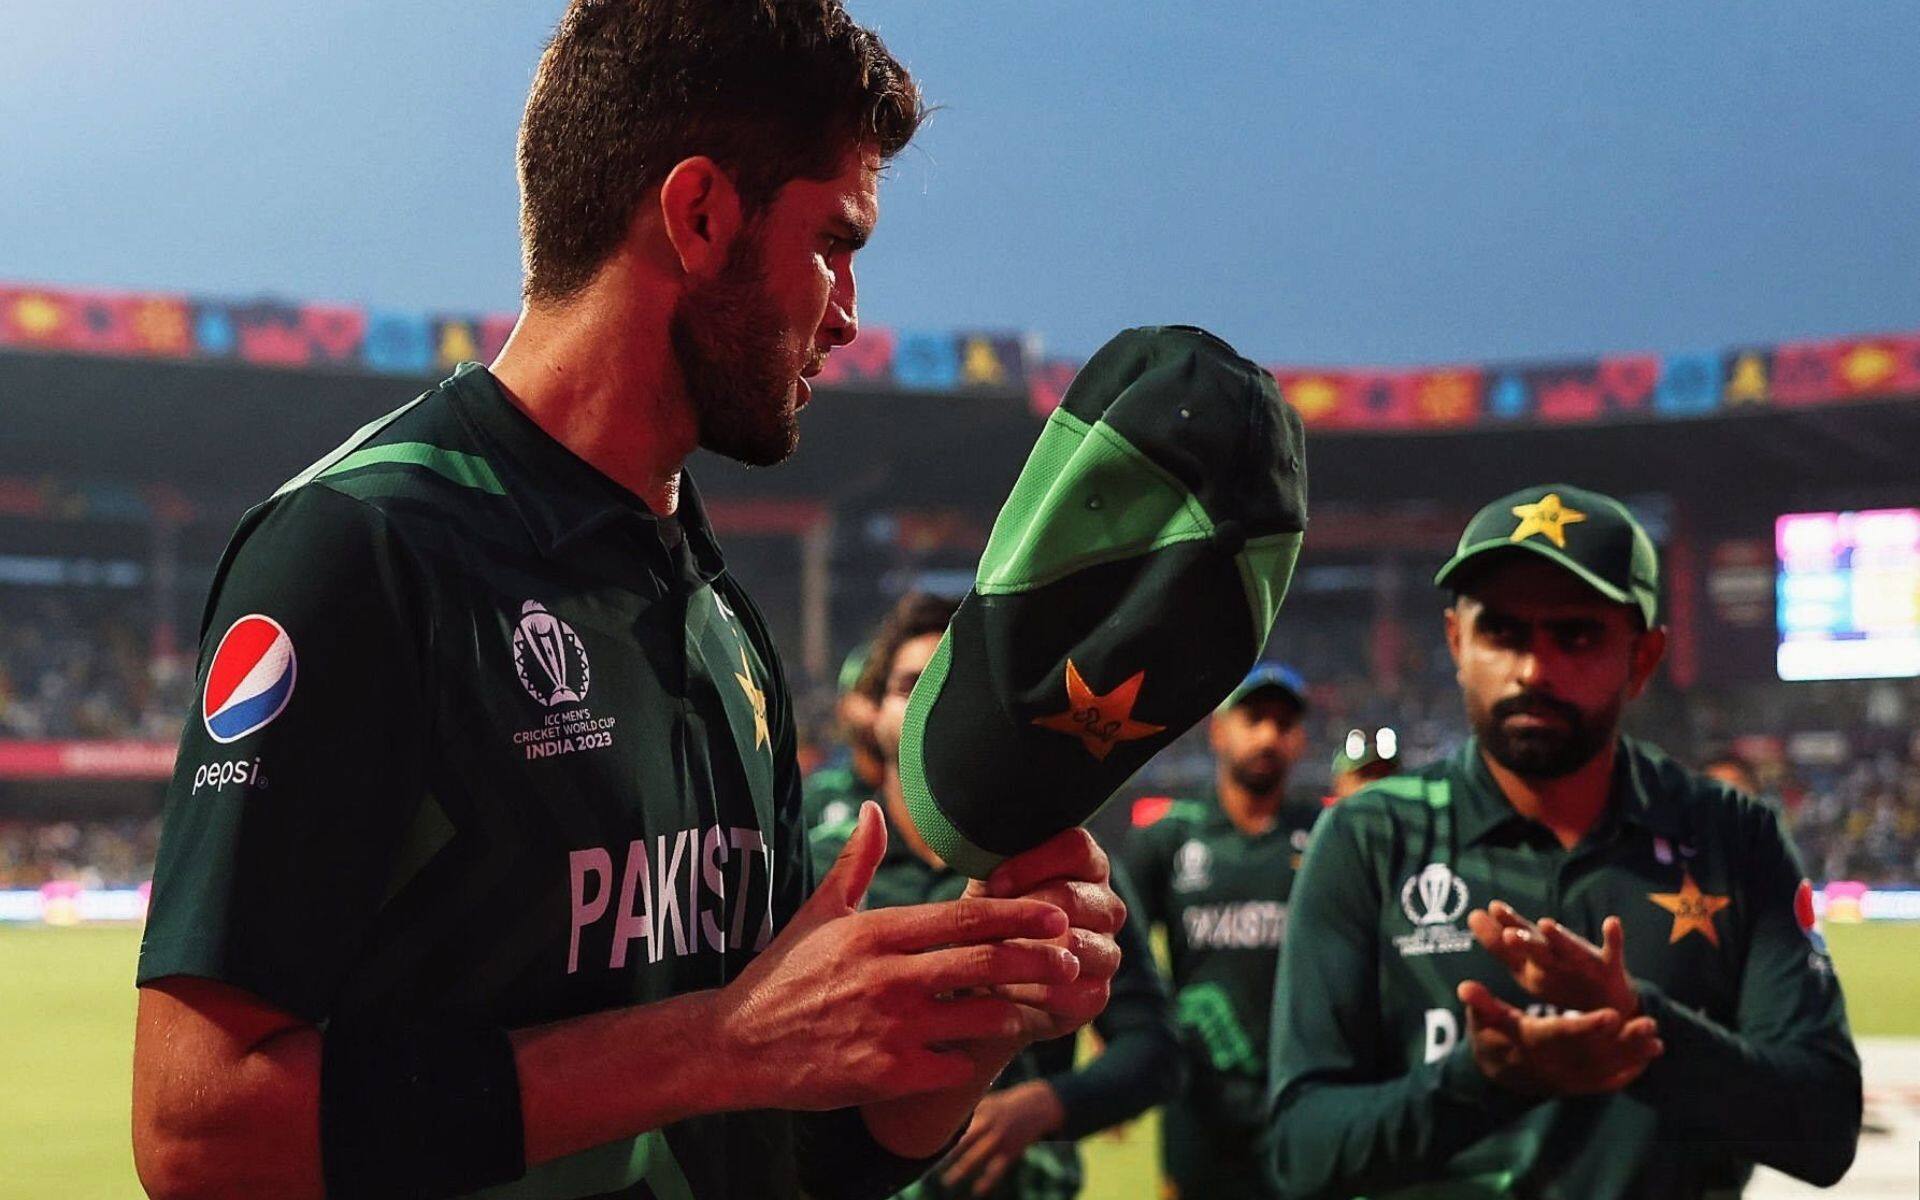 Shaheen Afridi sacked as Babar Azam restored as PAK's white ball captain by PCB (X.com)